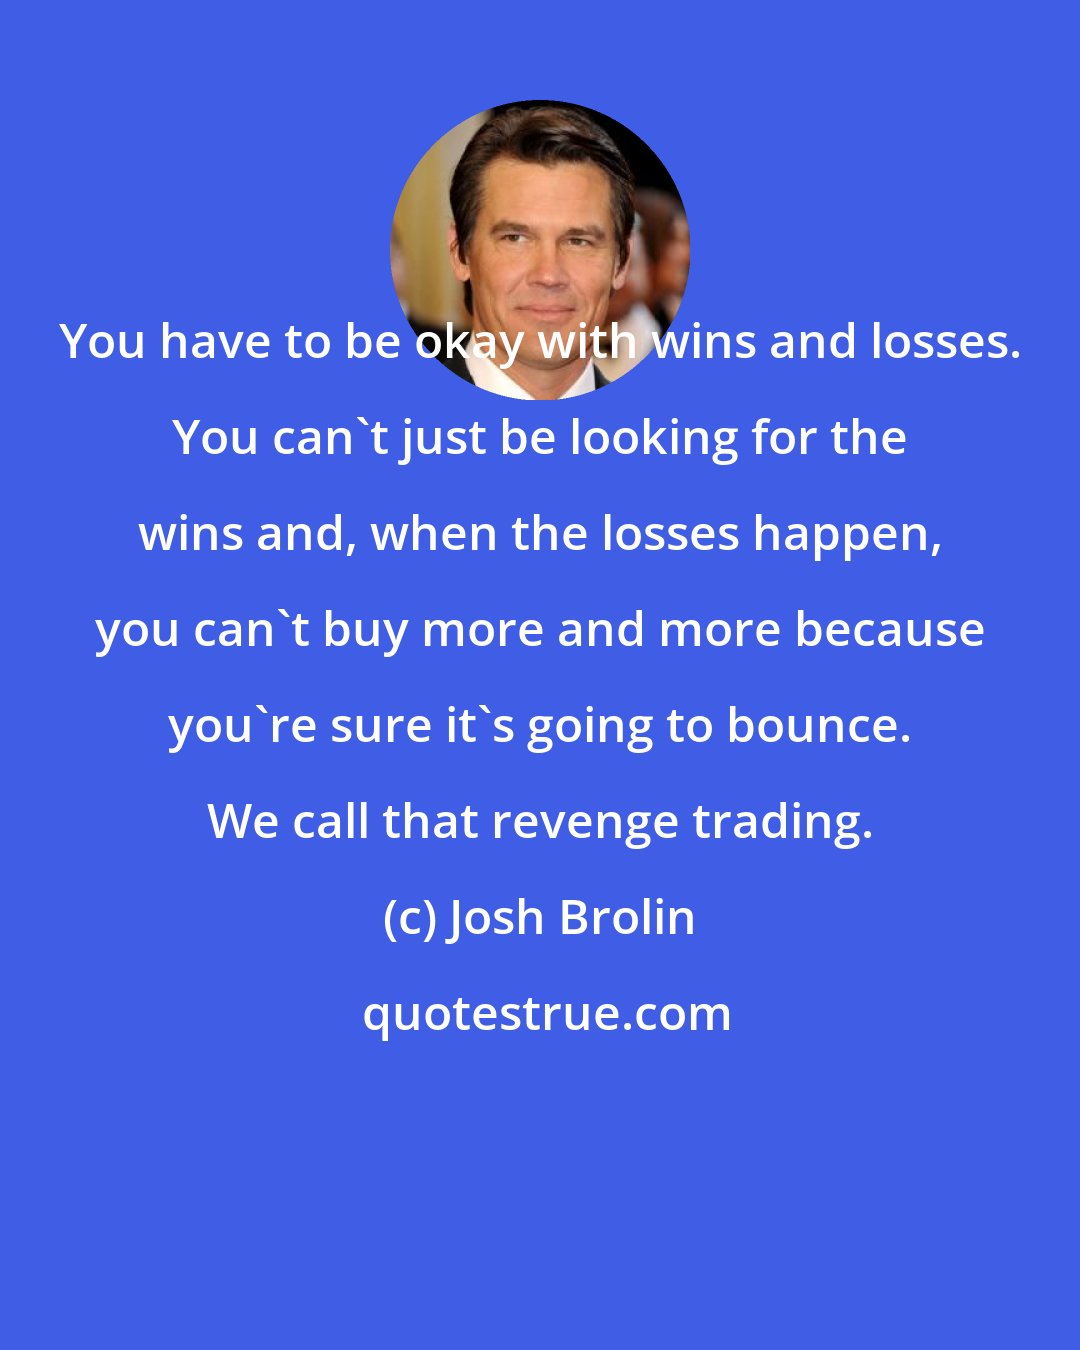 Josh Brolin: You have to be okay with wins and losses. You can't just be looking for the wins and, when the losses happen, you can't buy more and more because you're sure it's going to bounce. We call that revenge trading.